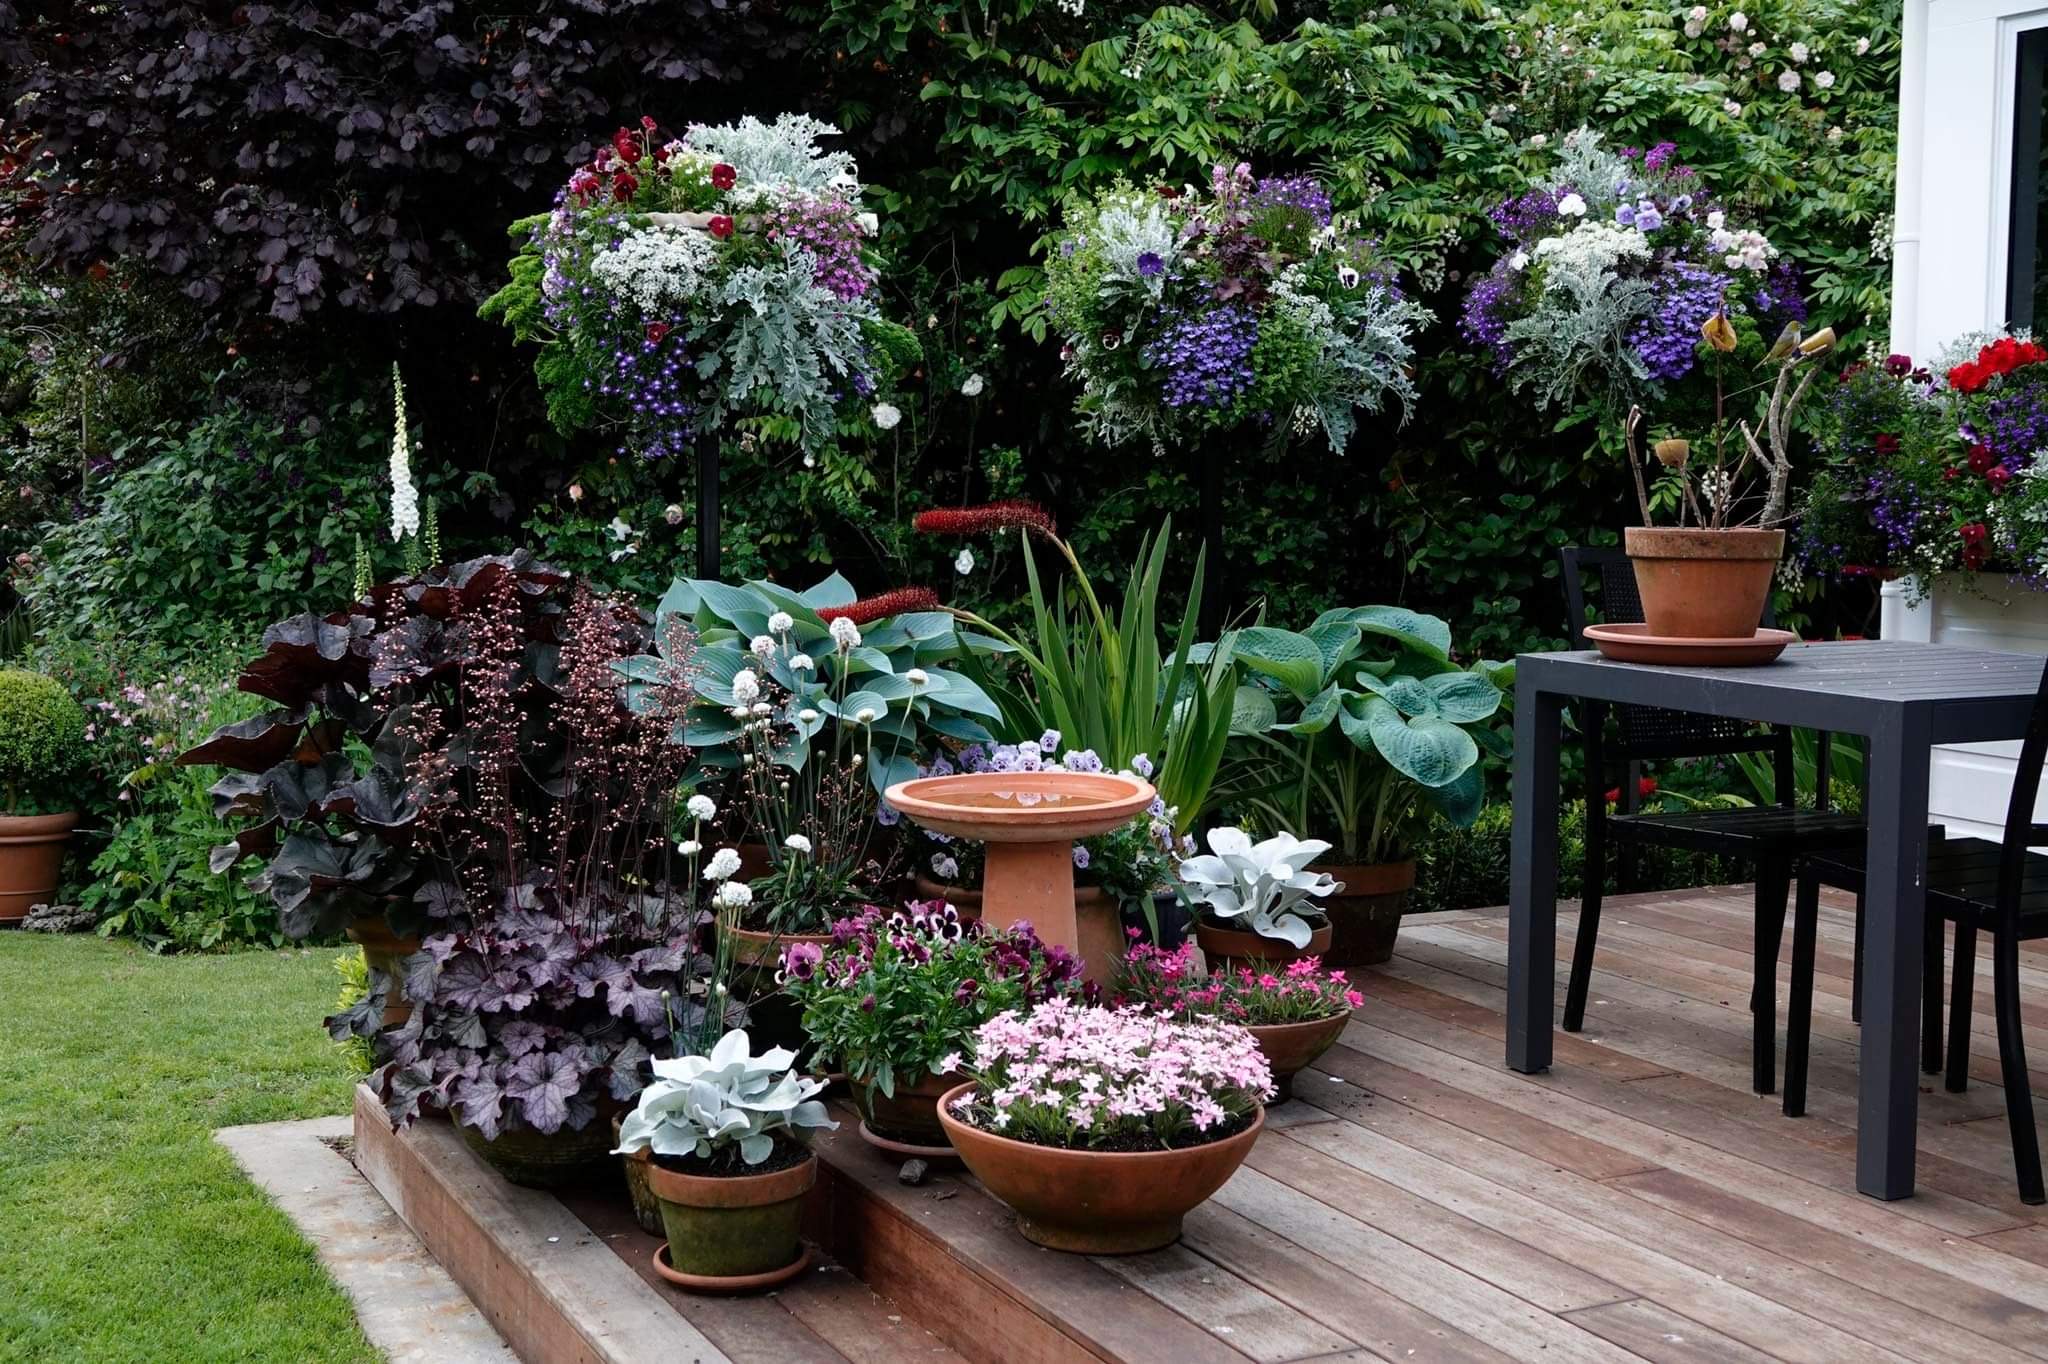 A wooden tiled garden patio with a variety of potted plants and garden furniture